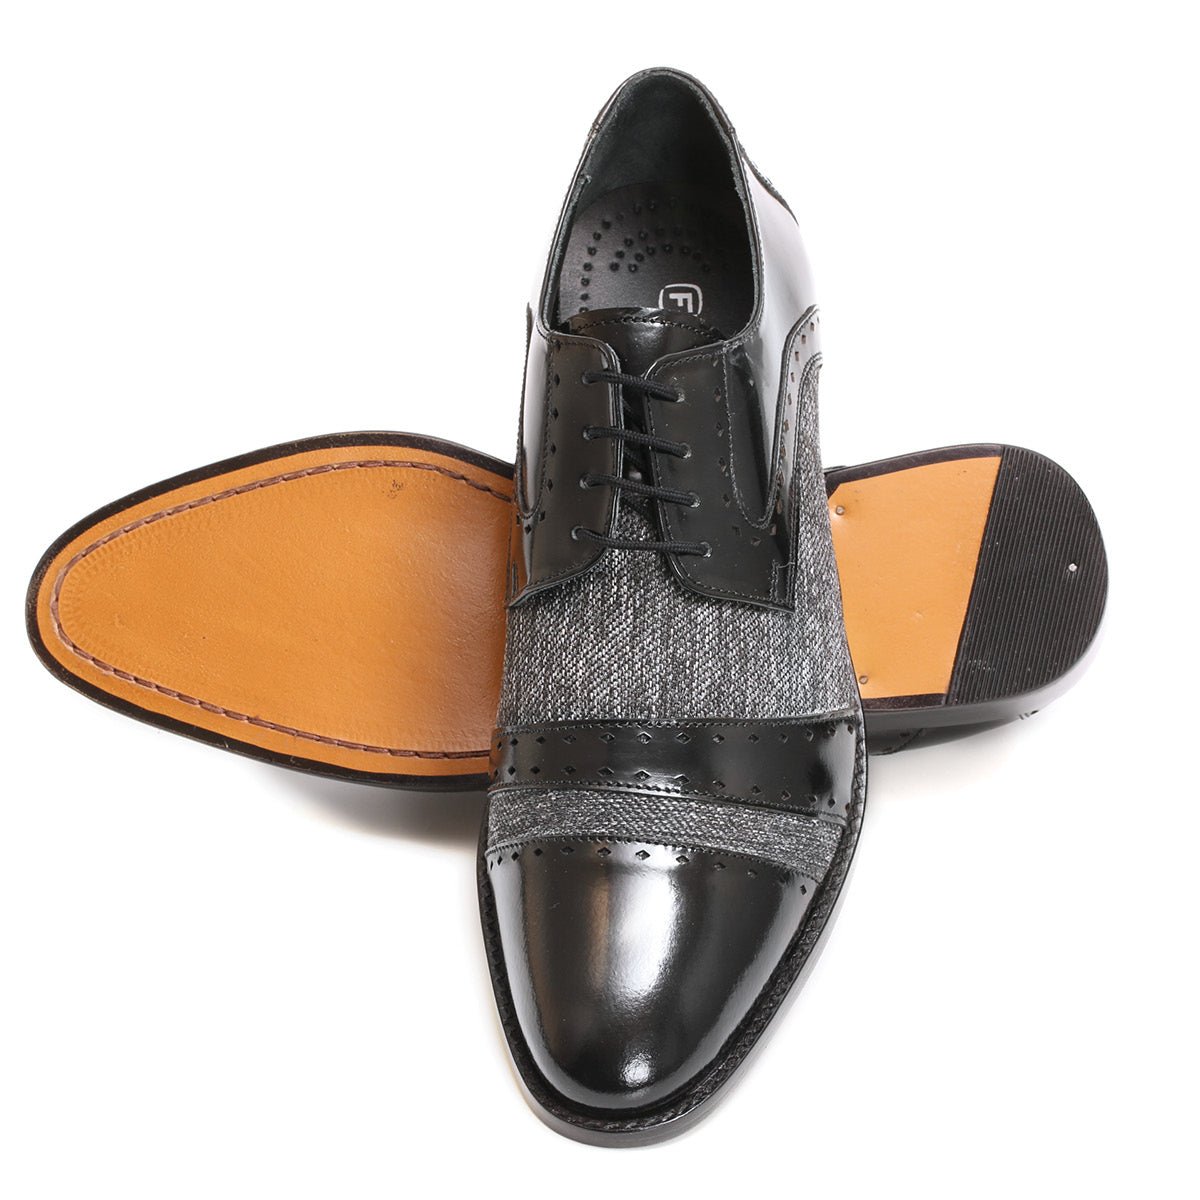 Yuma Leather Textile Derby Style Dress Shoes